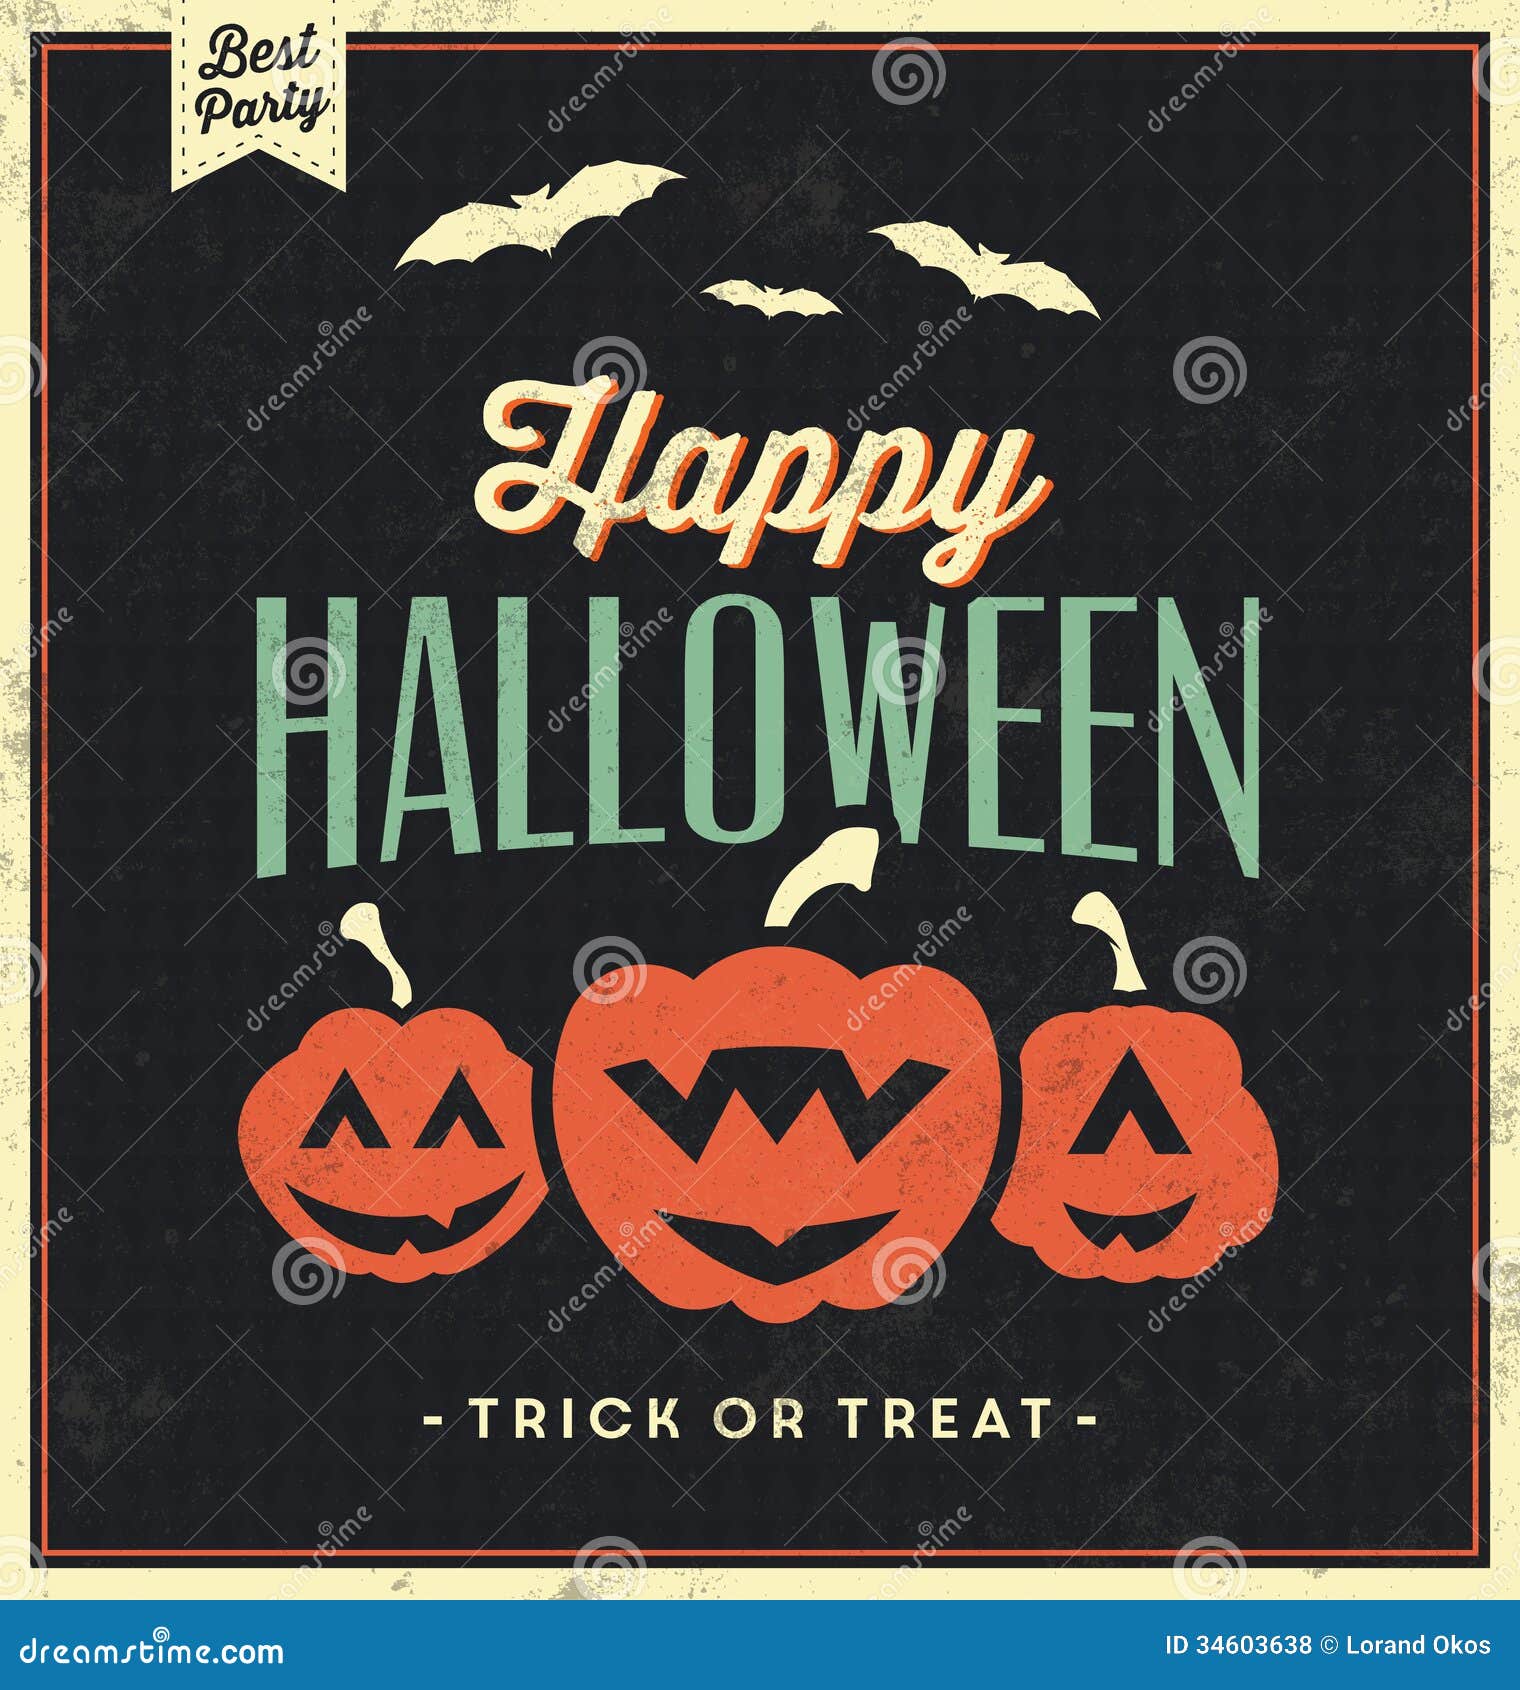 Happy Halloween Sign With Pumpkins - Vintage Template Royalty Free ...